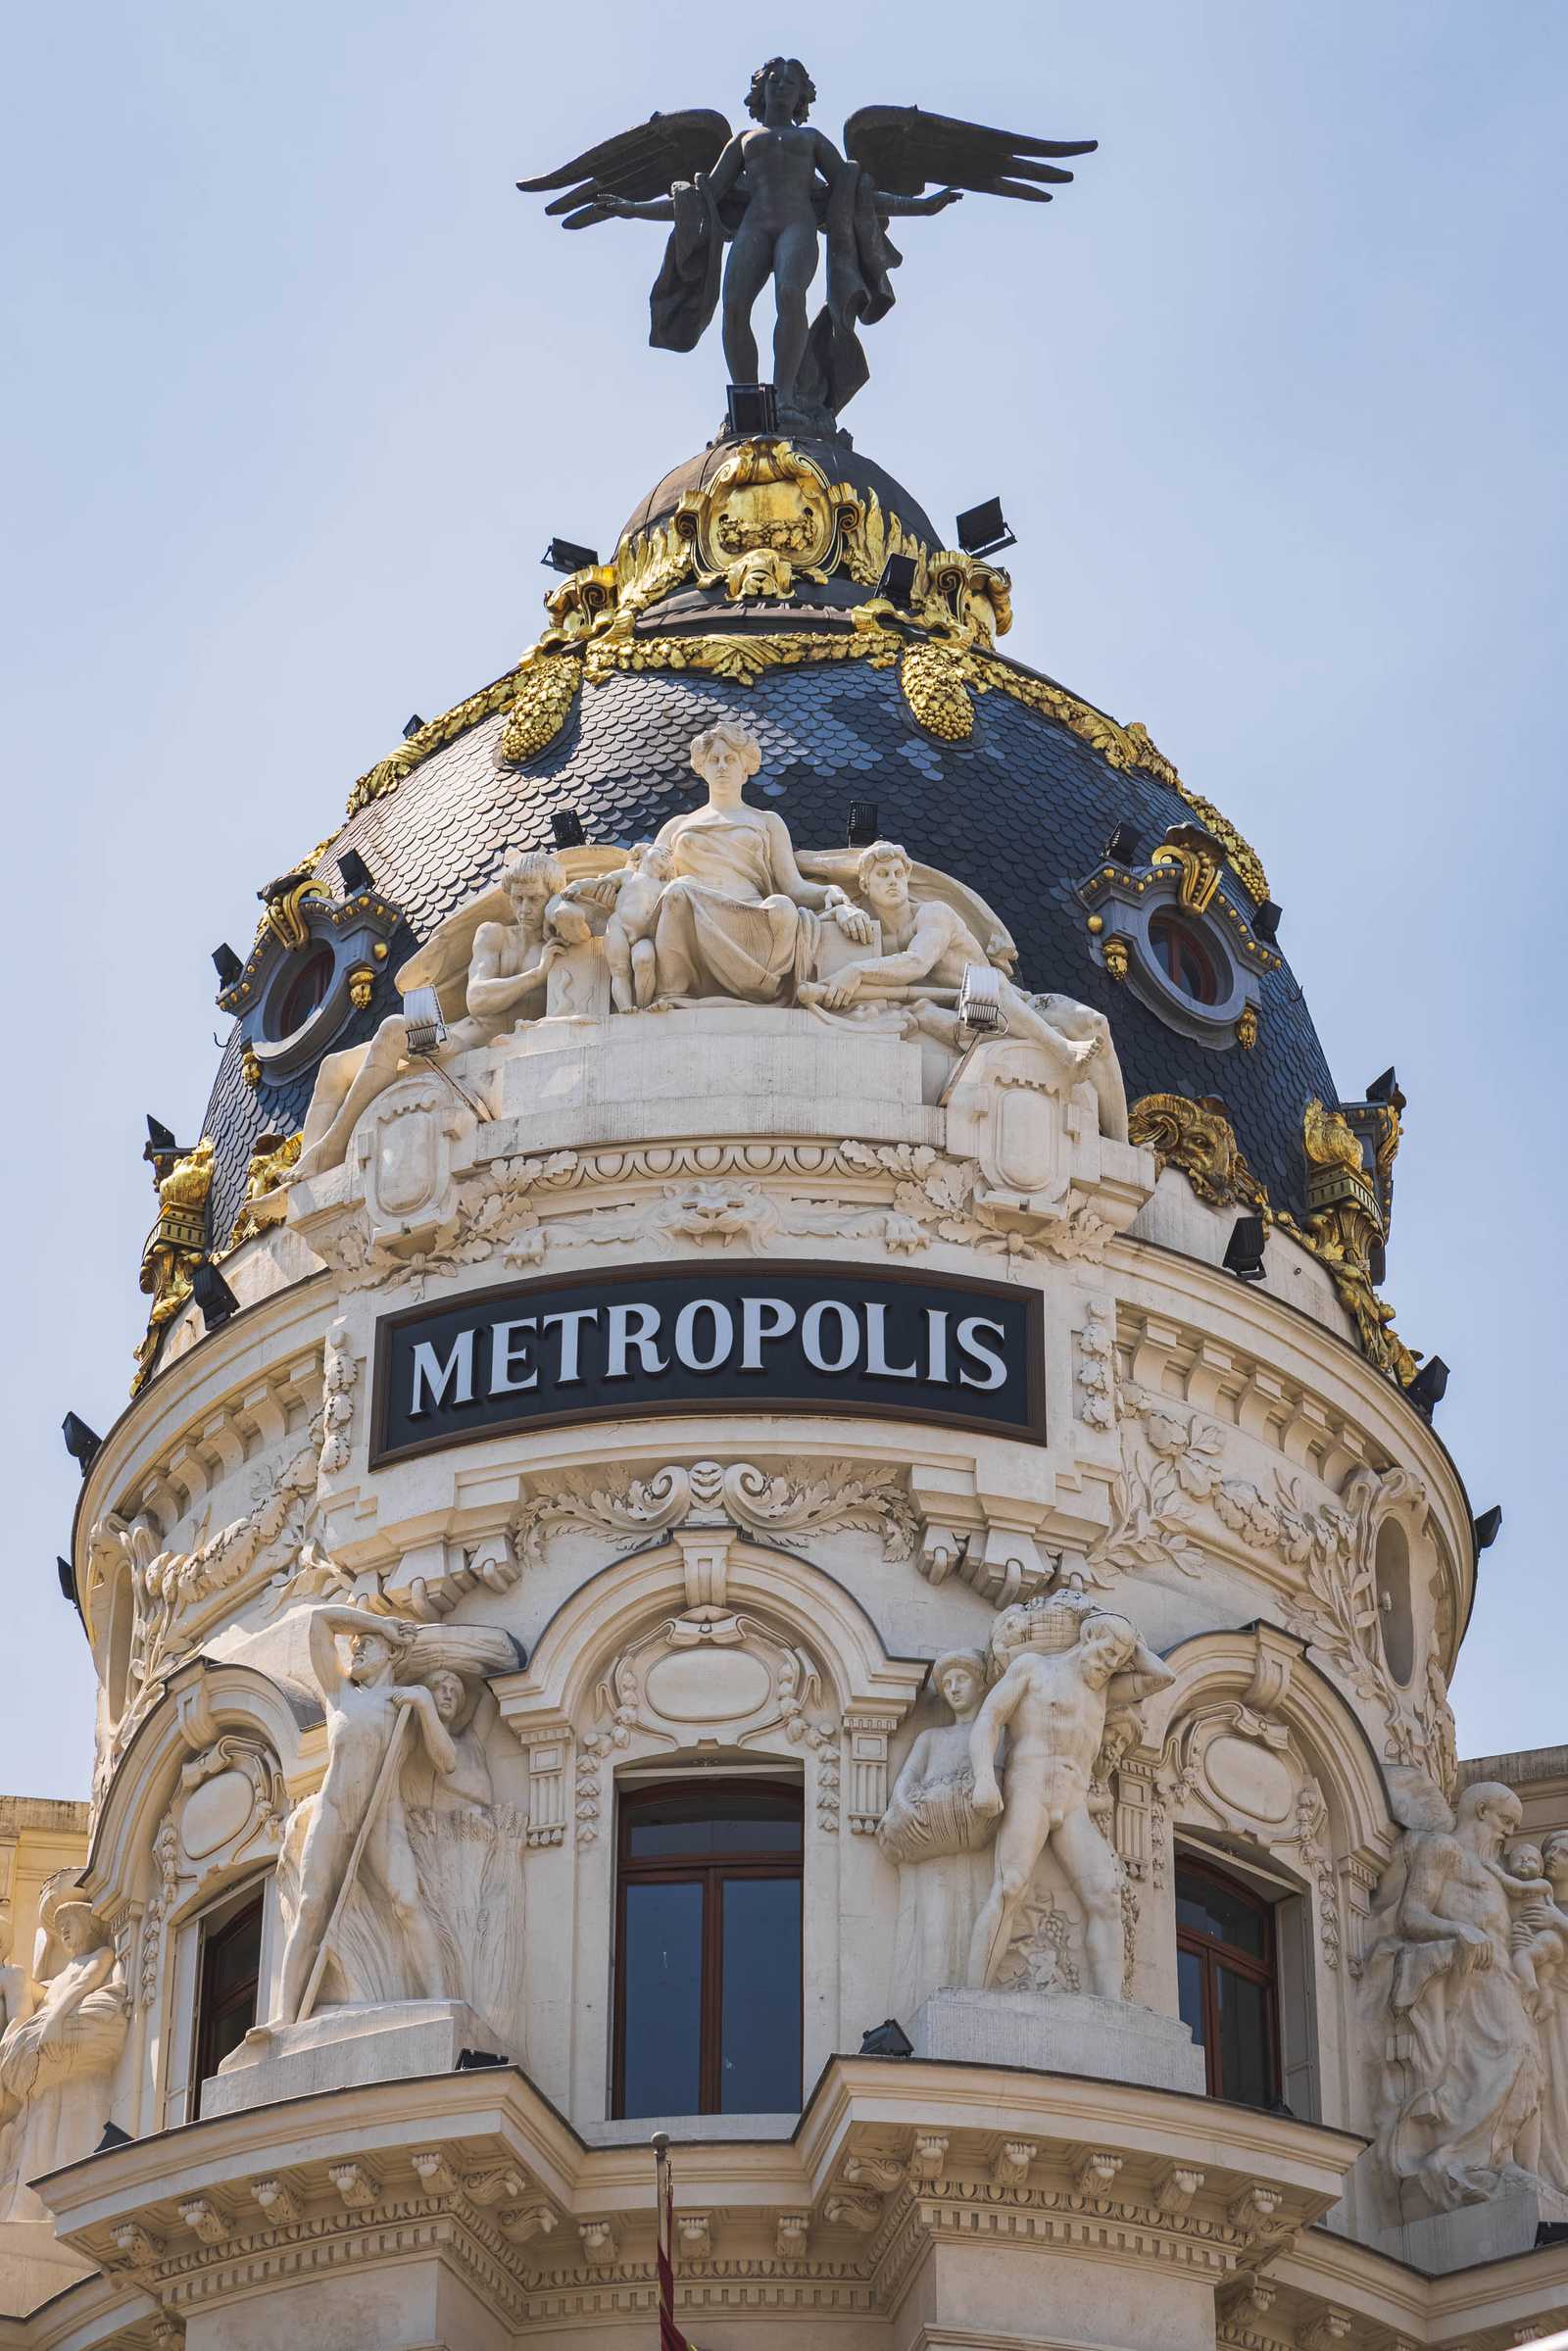 The dome at the top of the Metropolis Building in Madrid